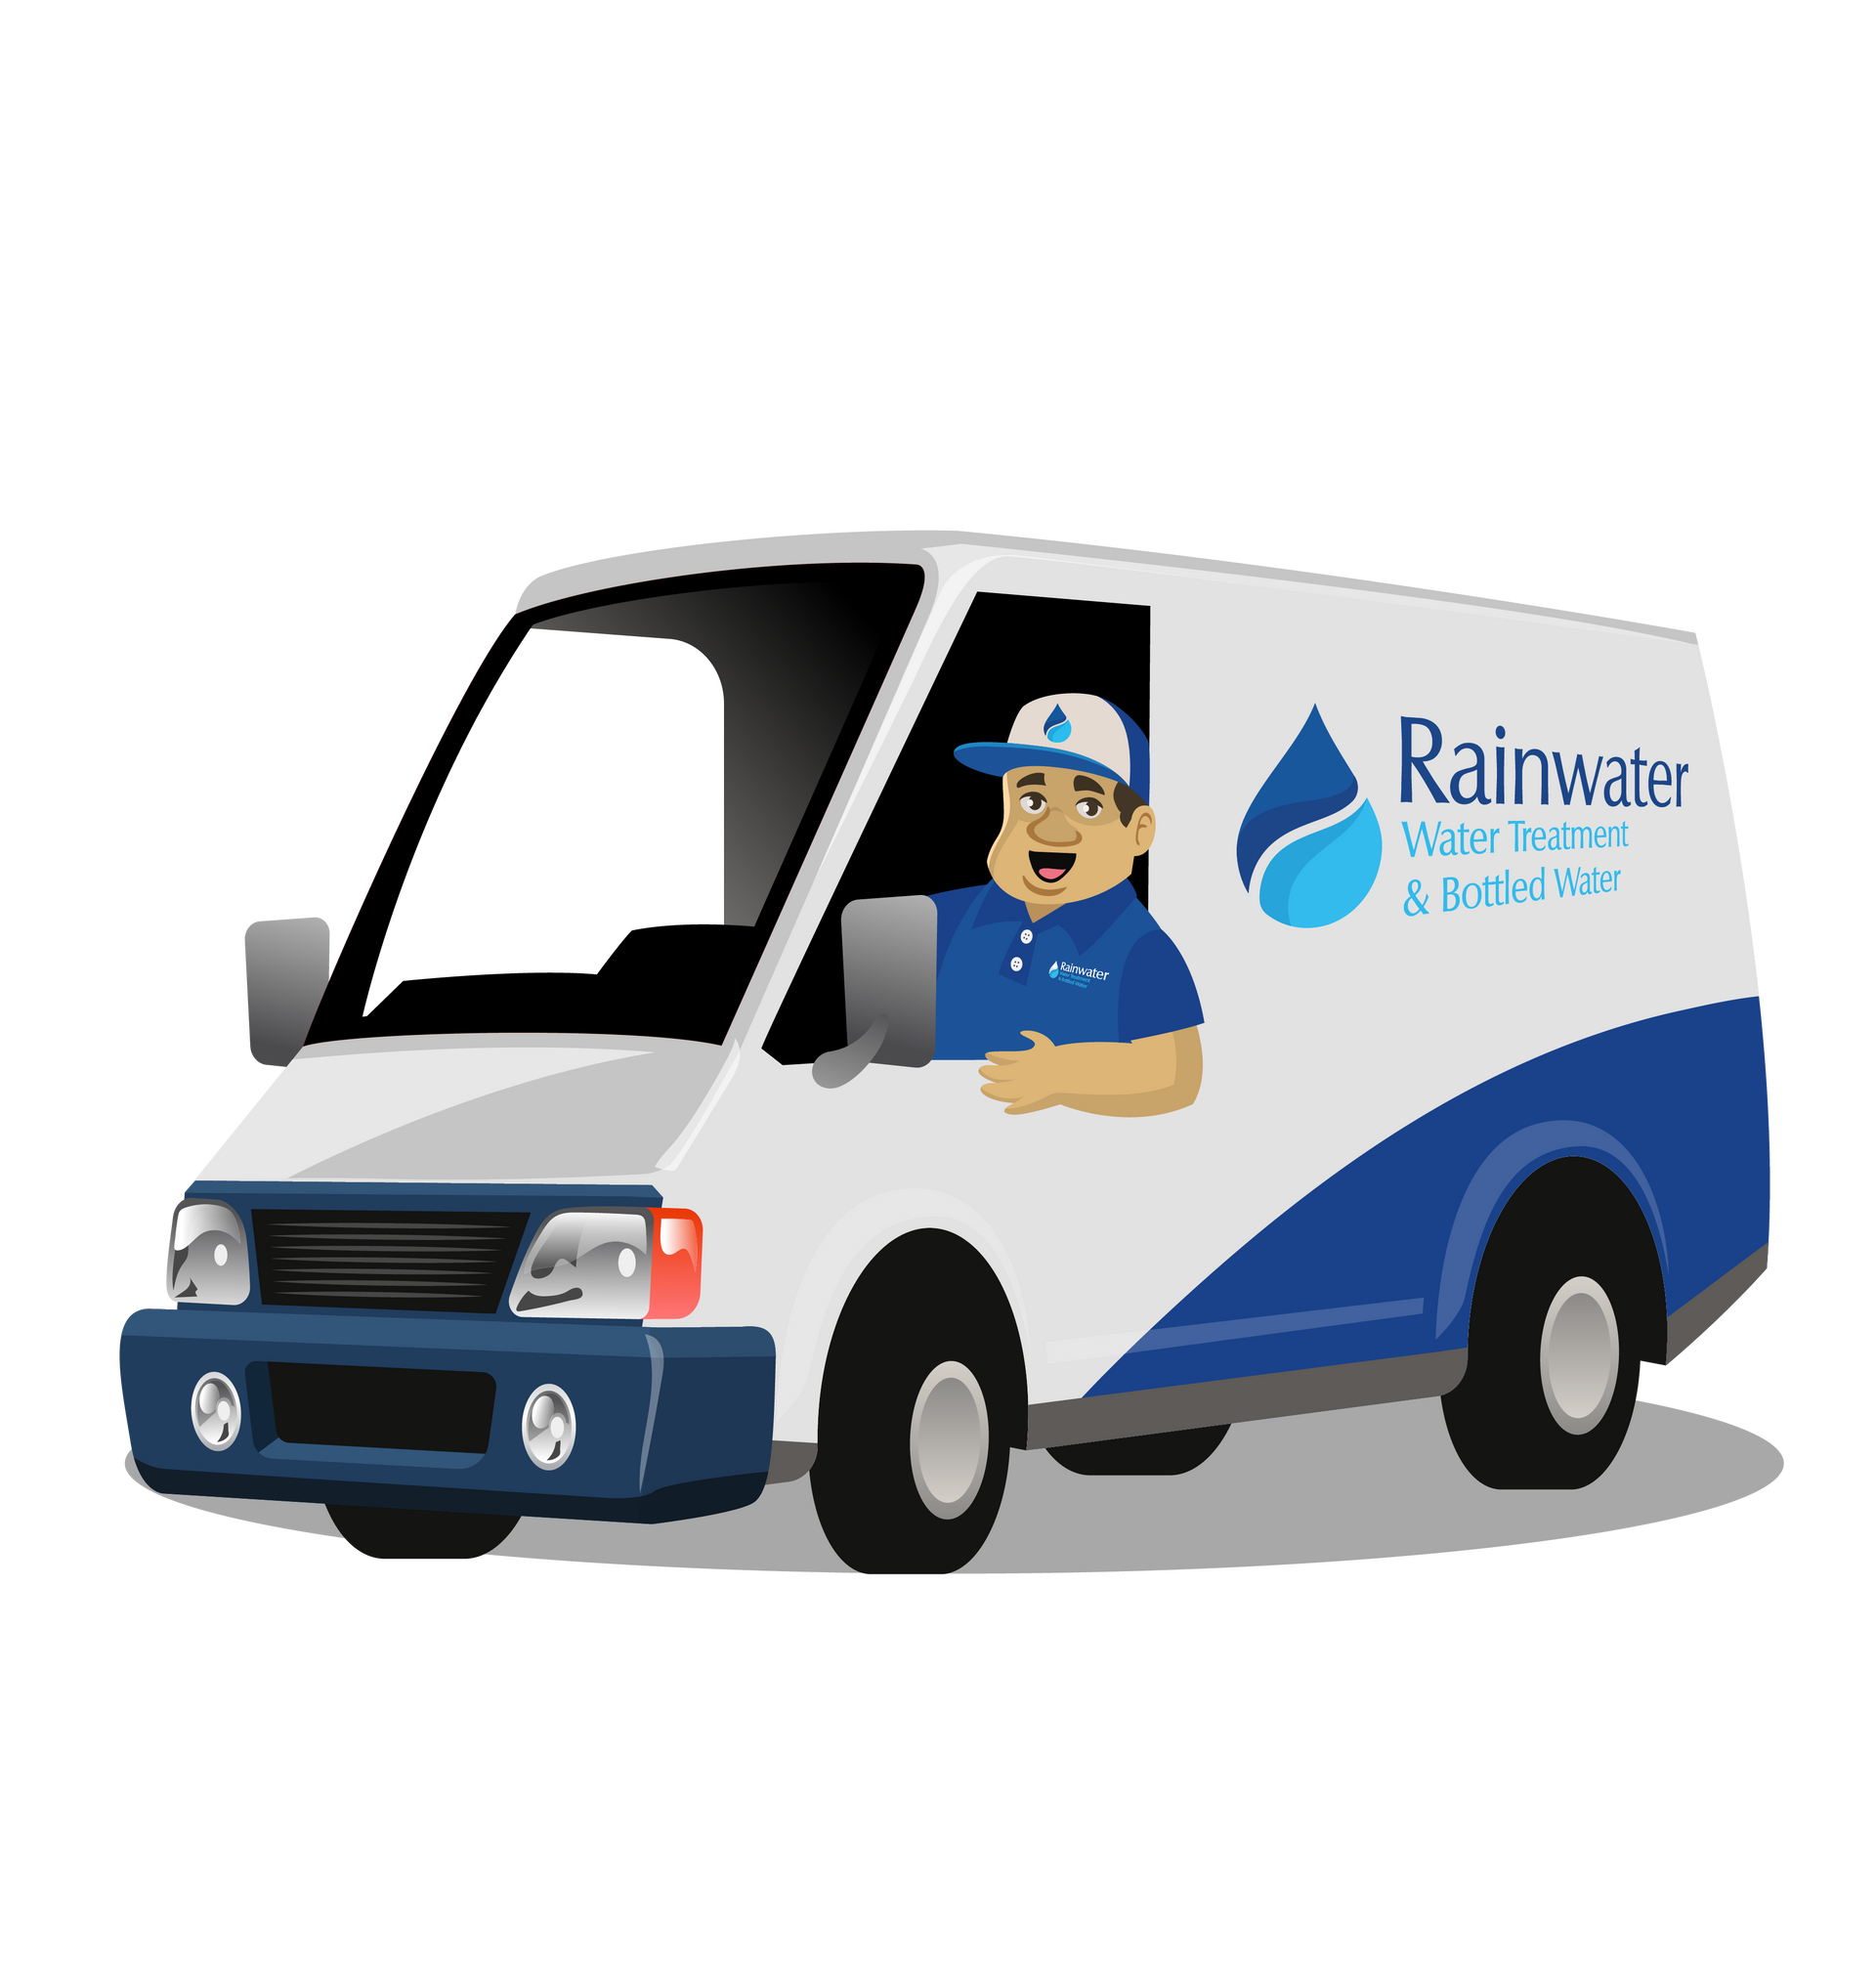 cartoon image of a Rainwater truck with driver